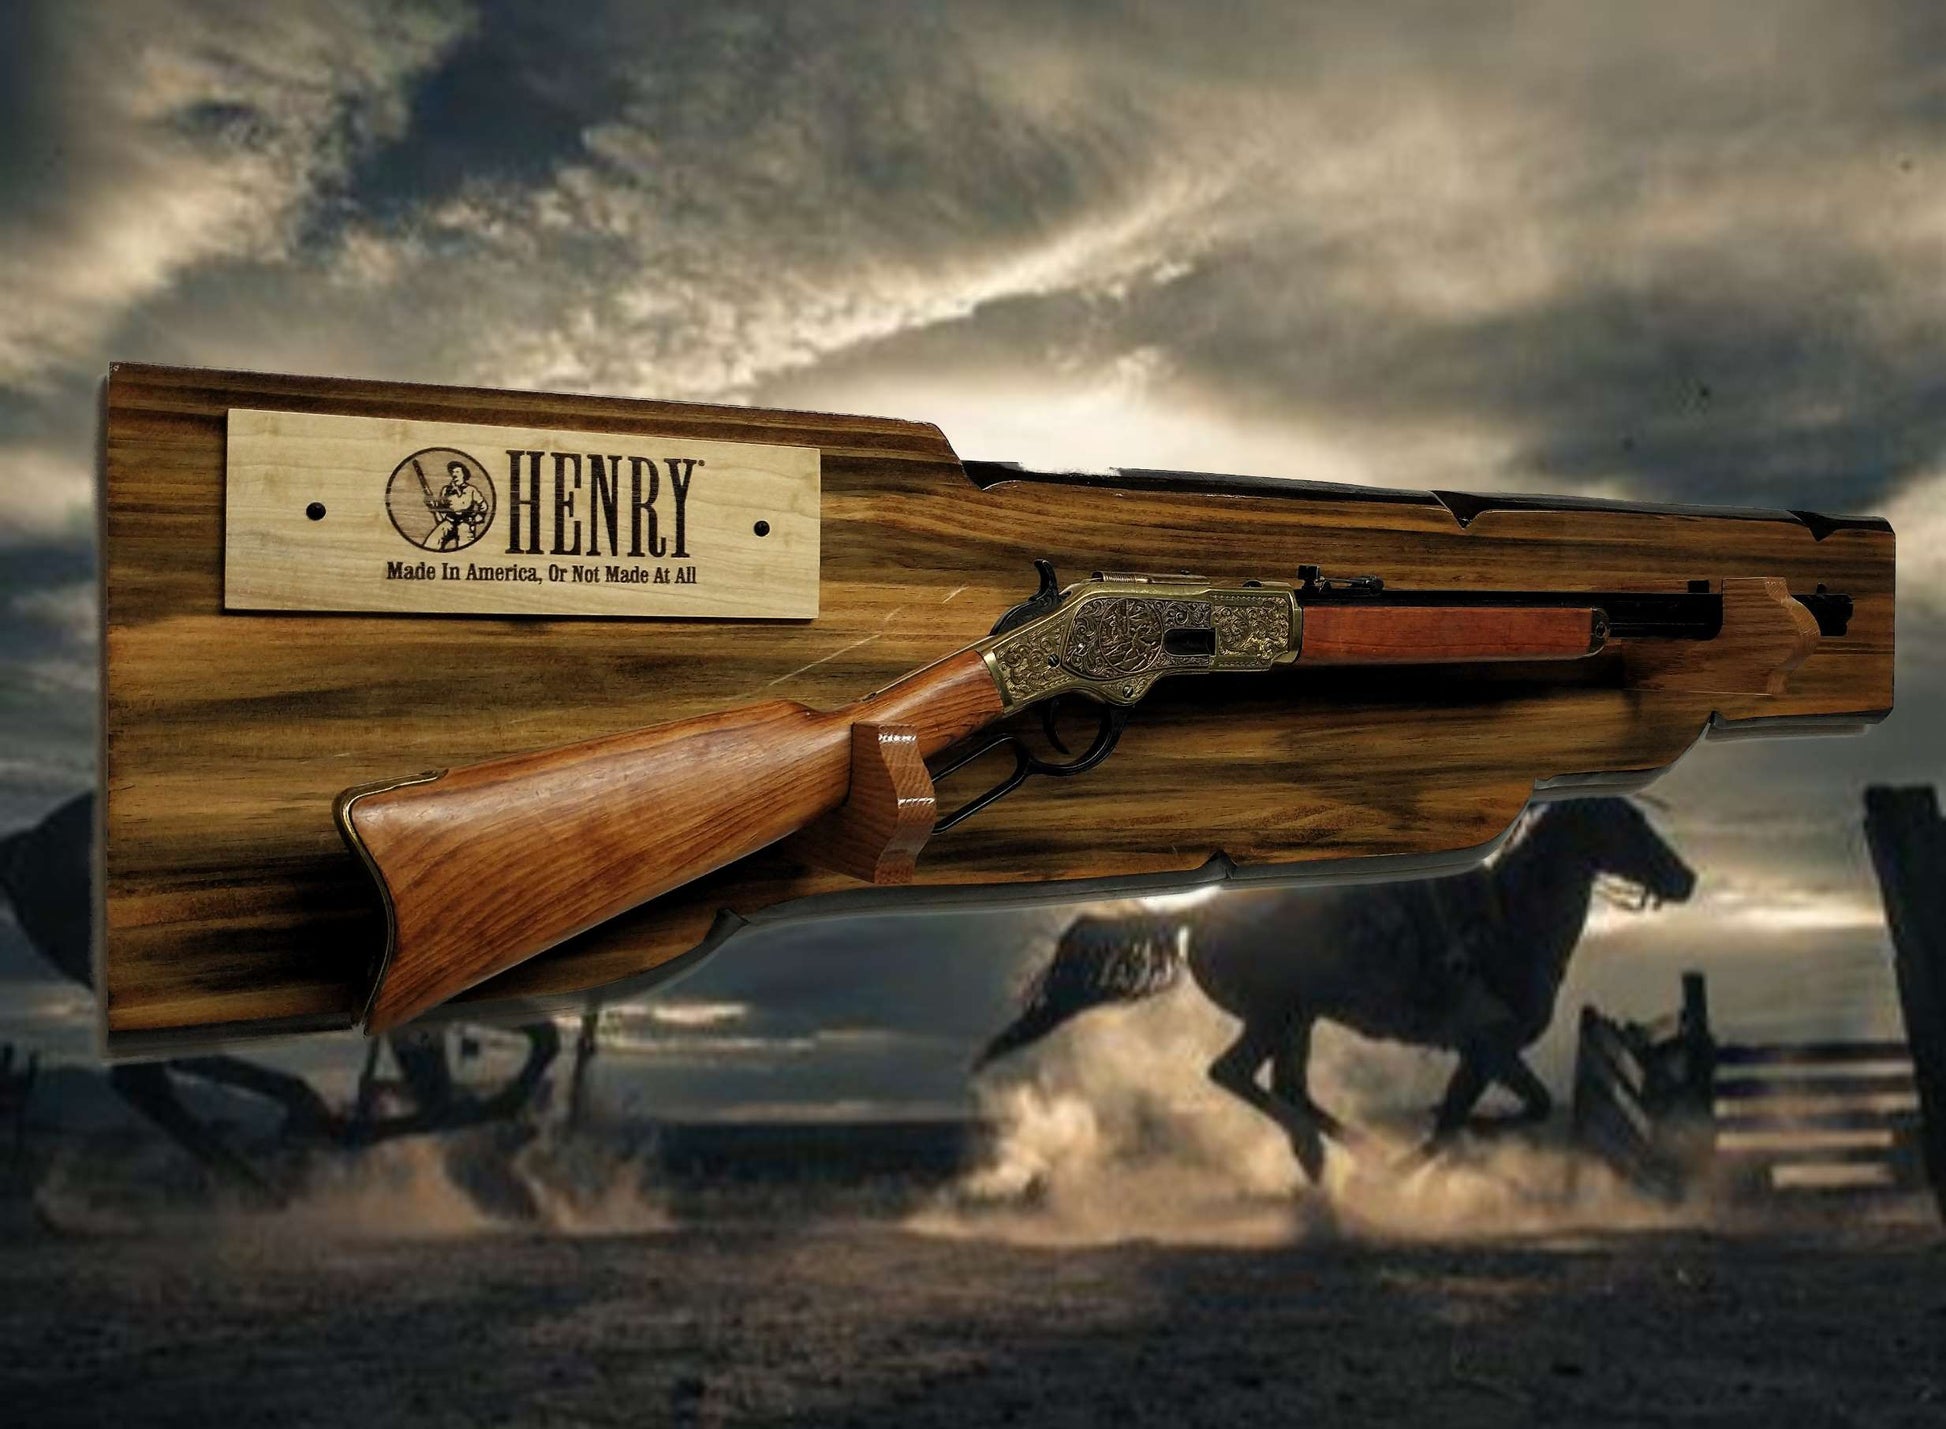 Walker Wood Gifts Rustic Henry Display For Lever Action Rifle Knotty Pine Faux Live Edge Cabin Décor Collectors Gift